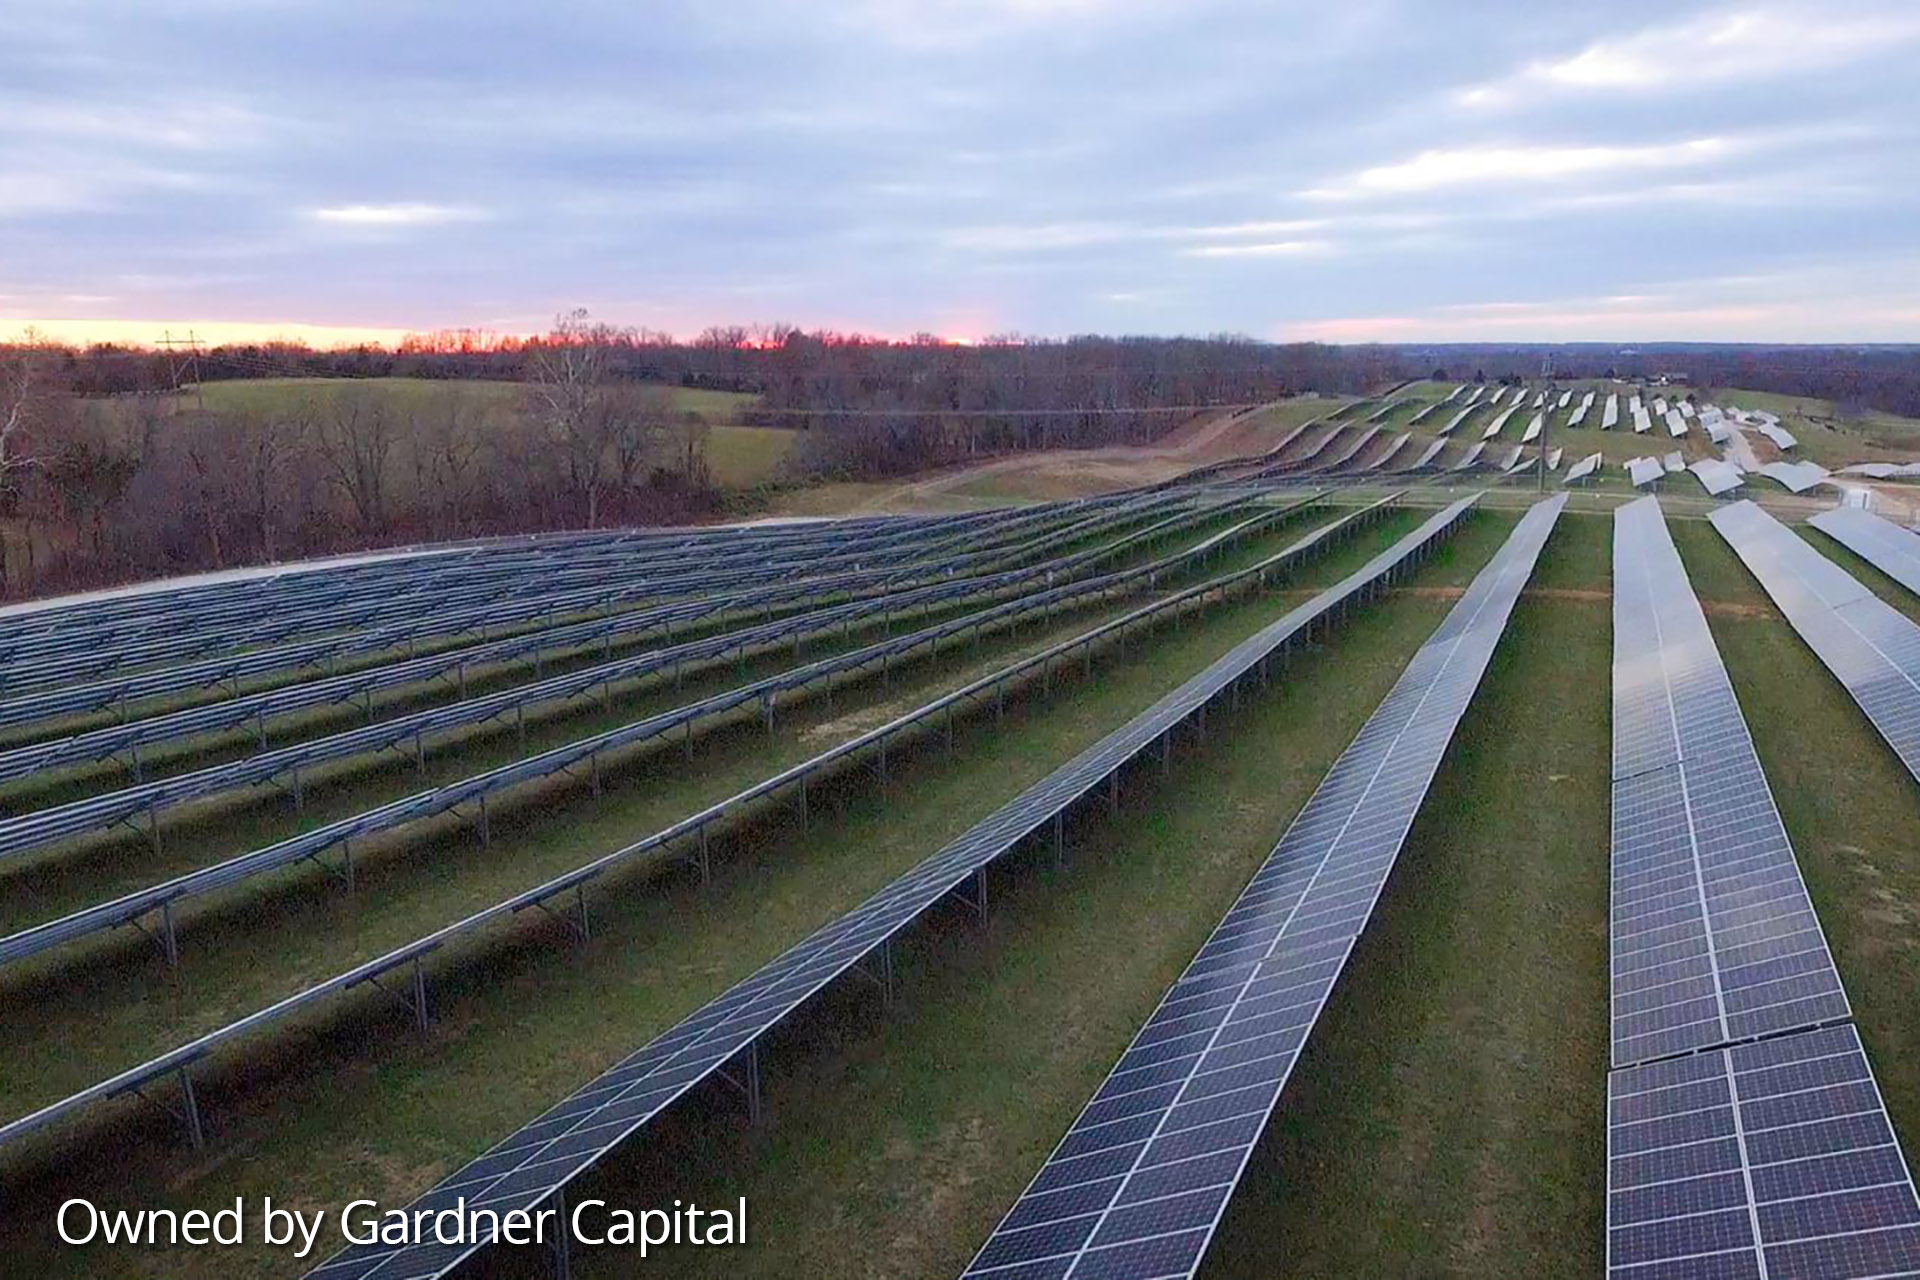 Field of solar panels with trees in the background as the sun is setting at the Nixa Solar project site in Missouri.